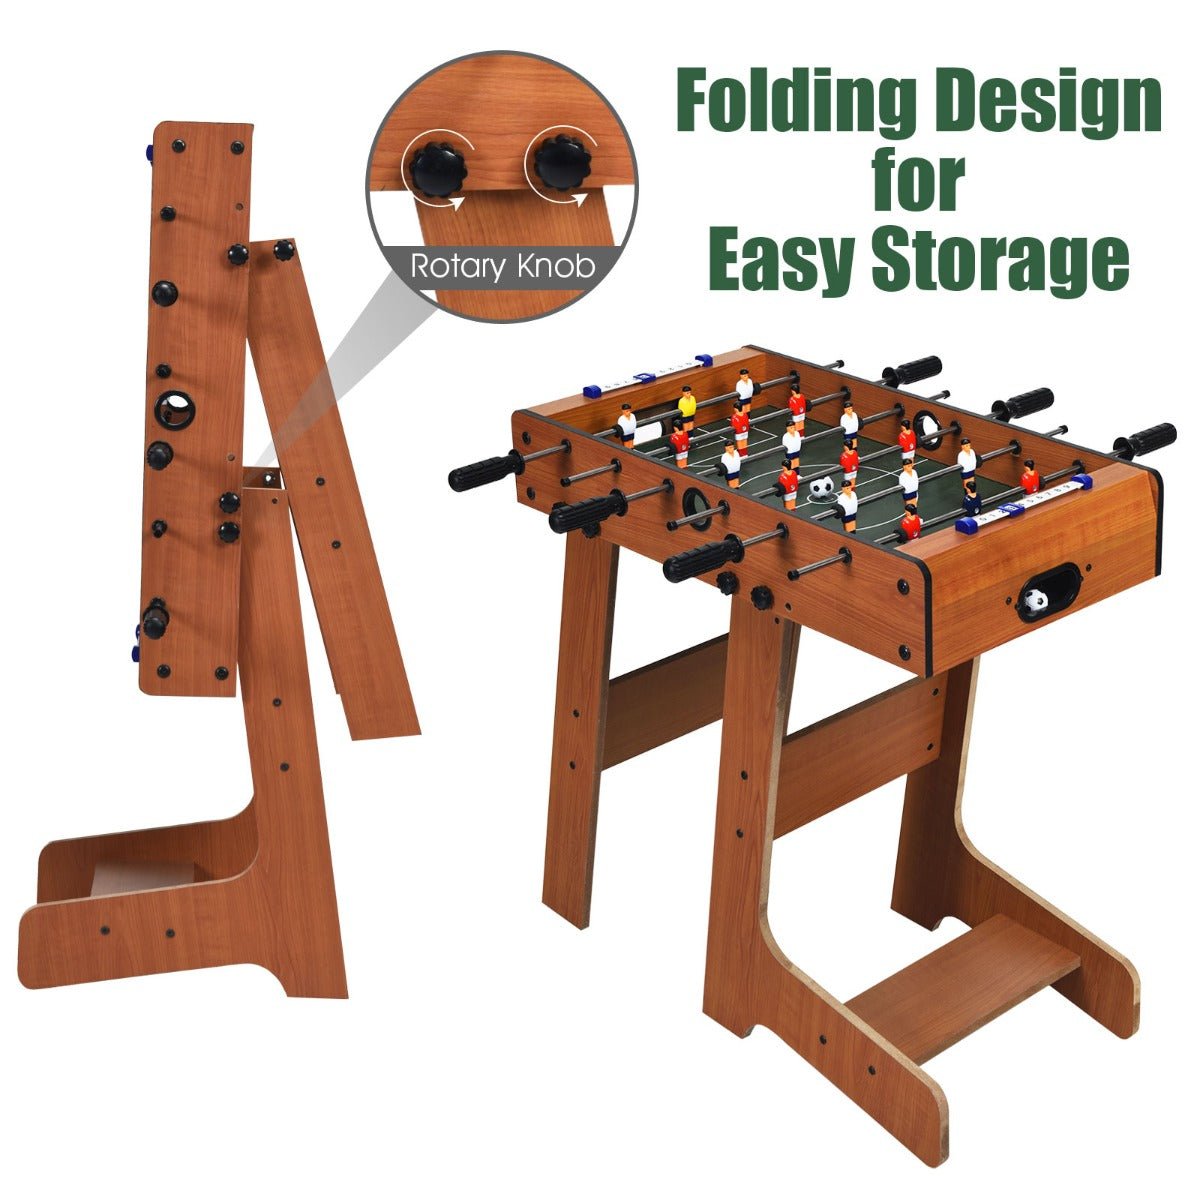 Folding Foosball Table - Your Ultimate Game Room Companion